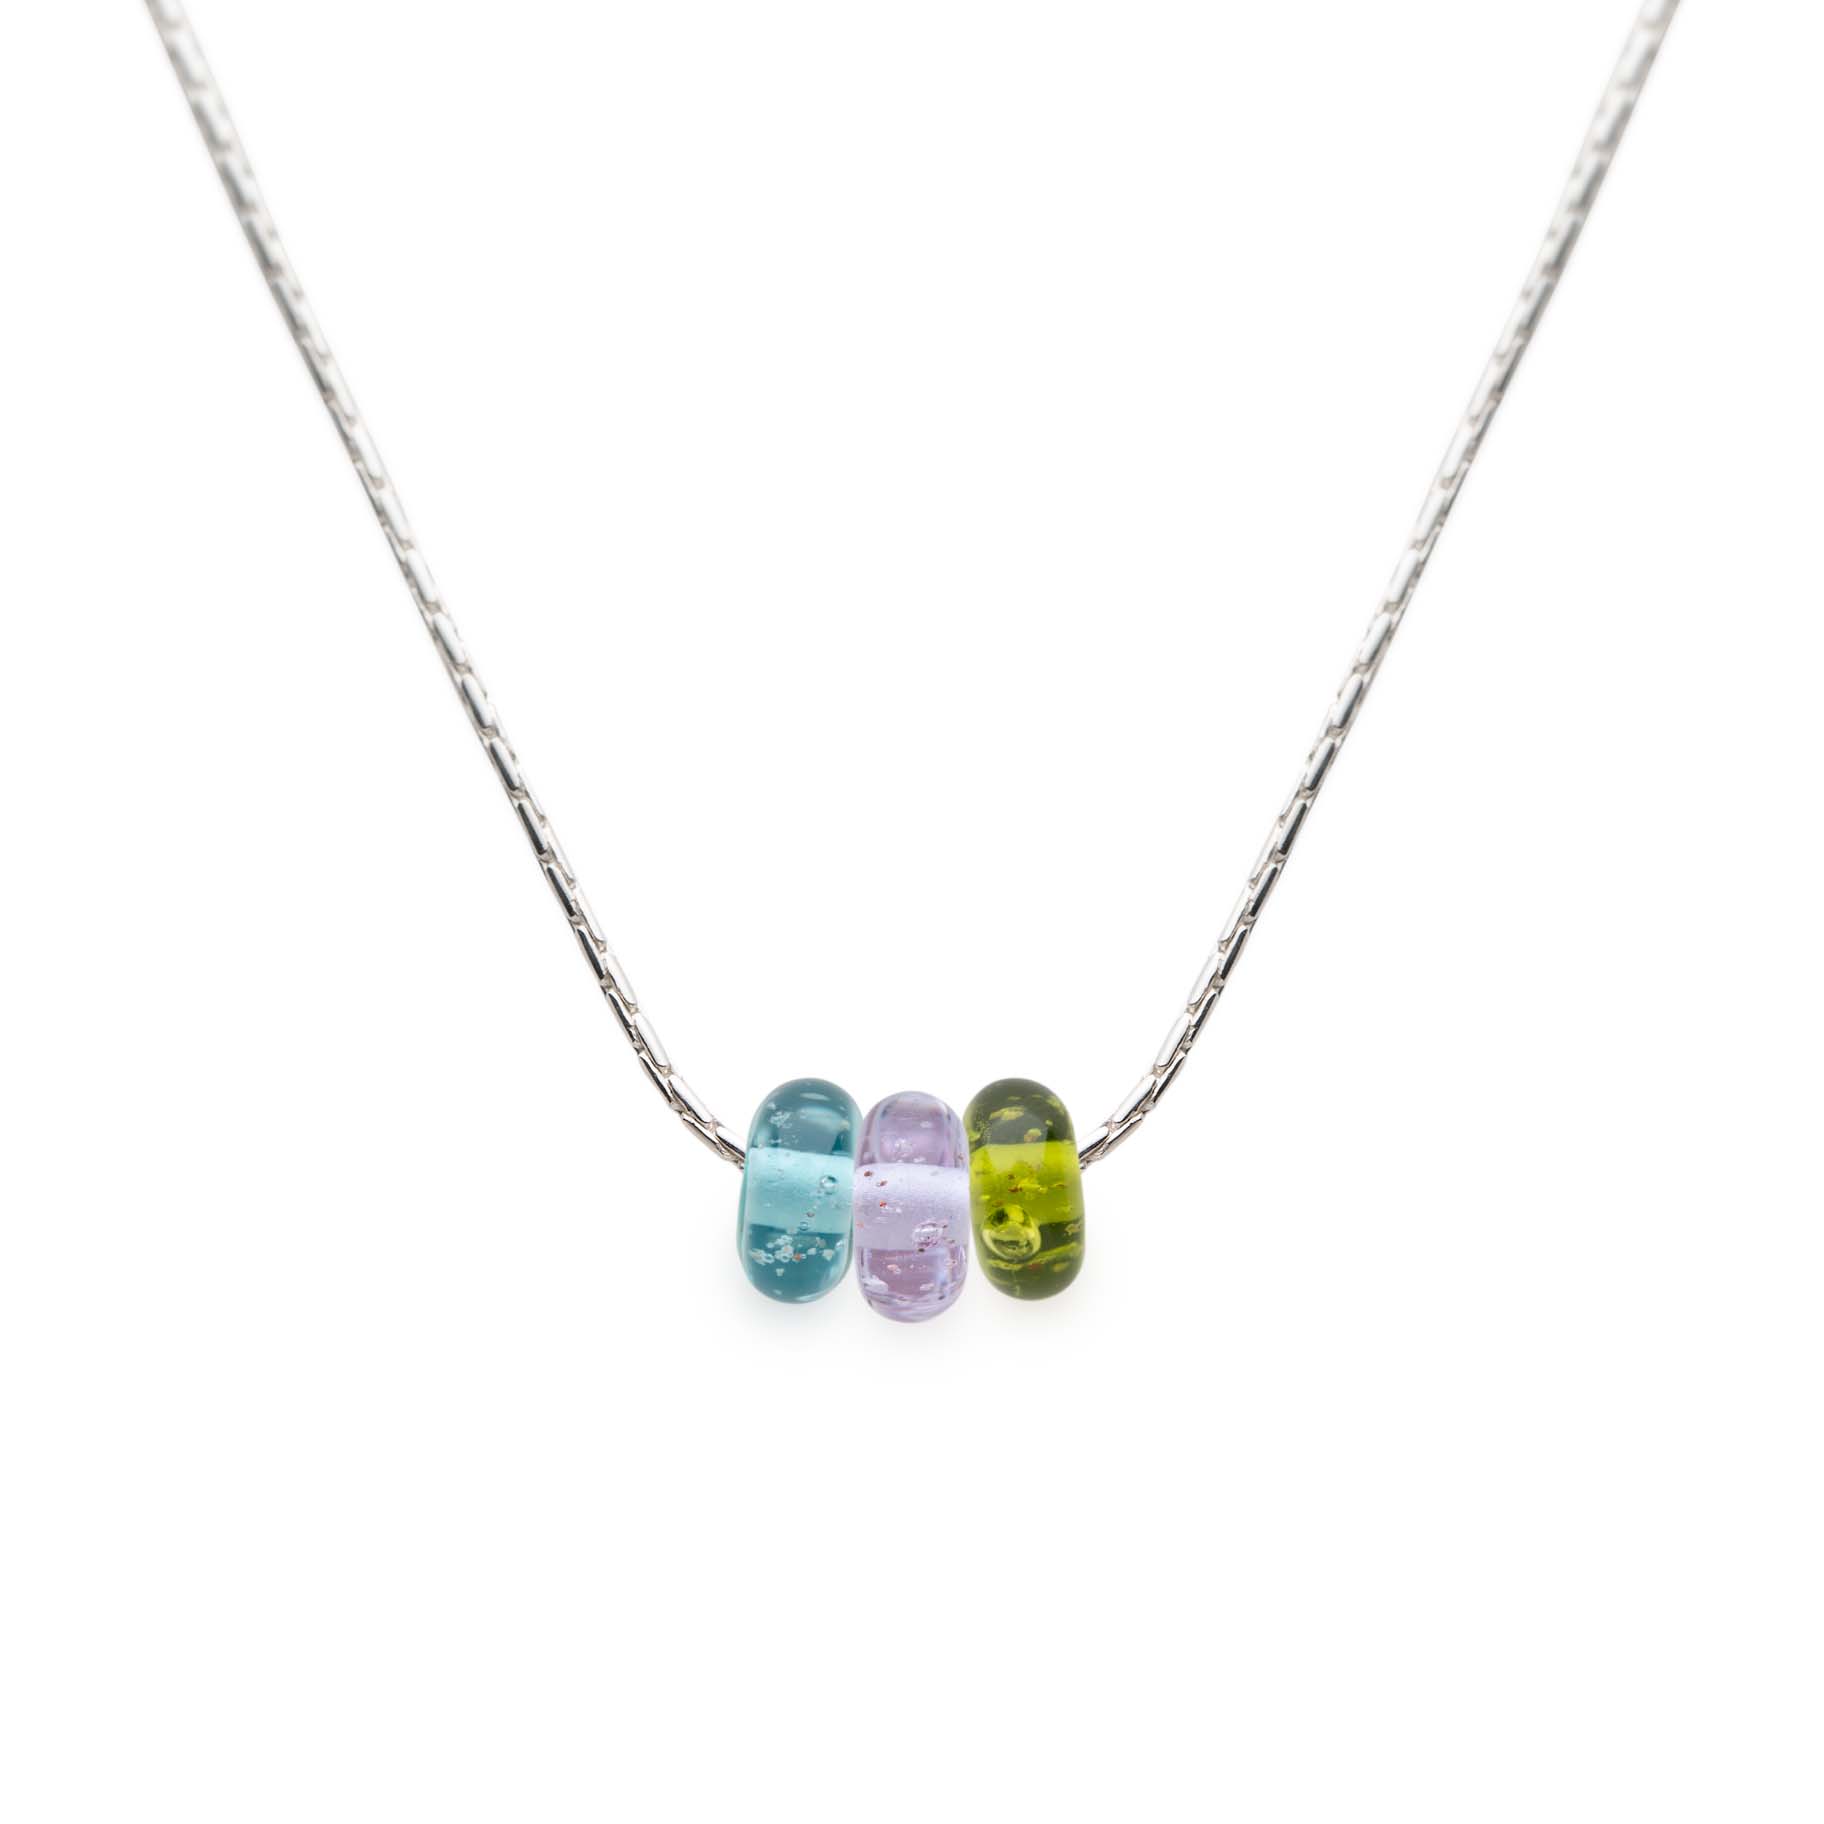 Colourful glass beads on sterling silver chain necklace.